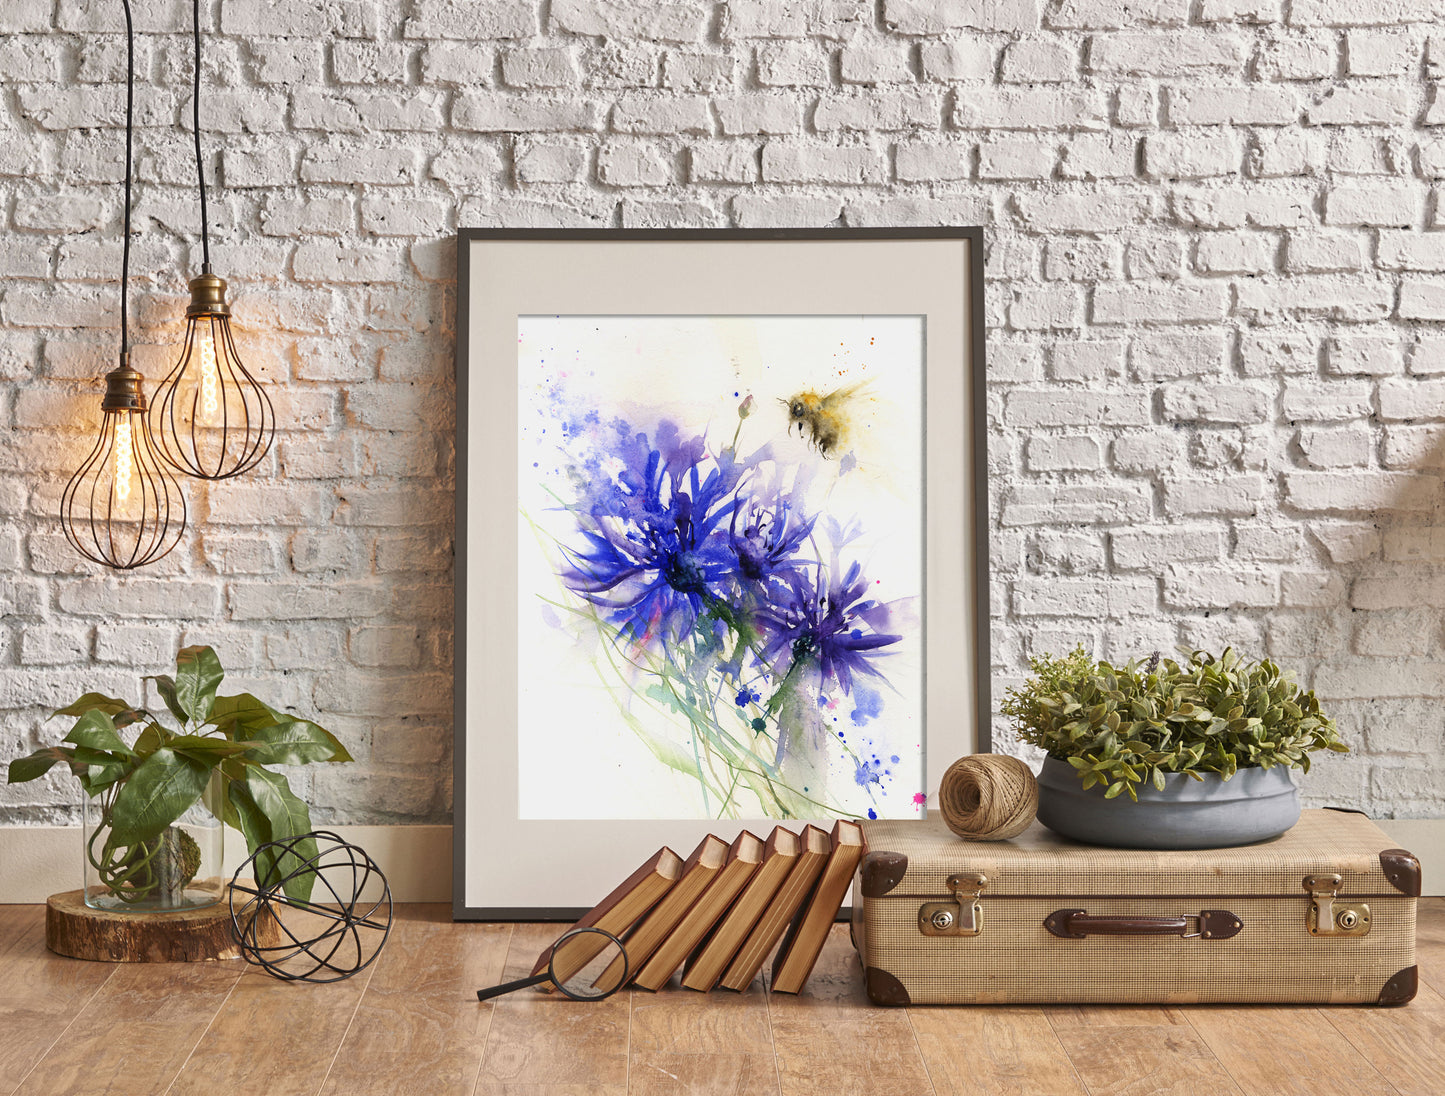 Limited edition print "bee and the cornflower" - Jen Buckley Art limited edition animal art prints